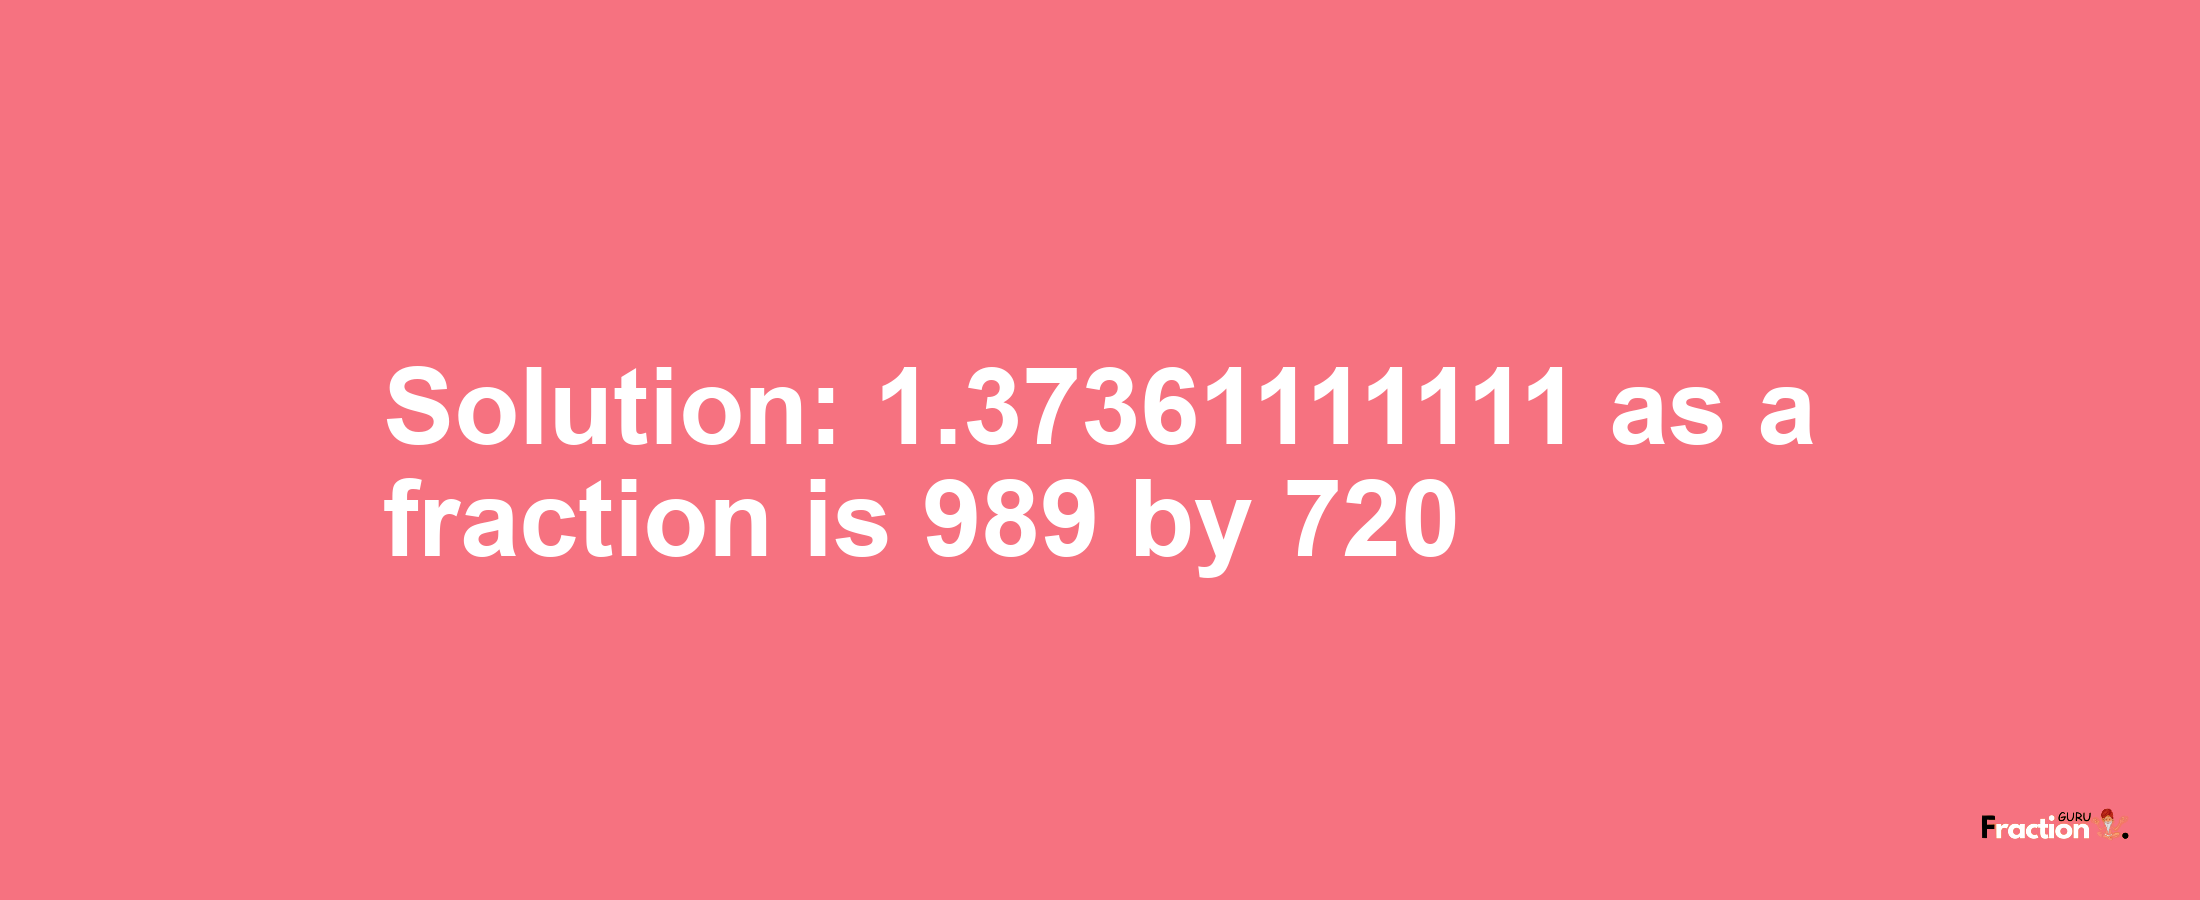 Solution:1.37361111111 as a fraction is 989/720